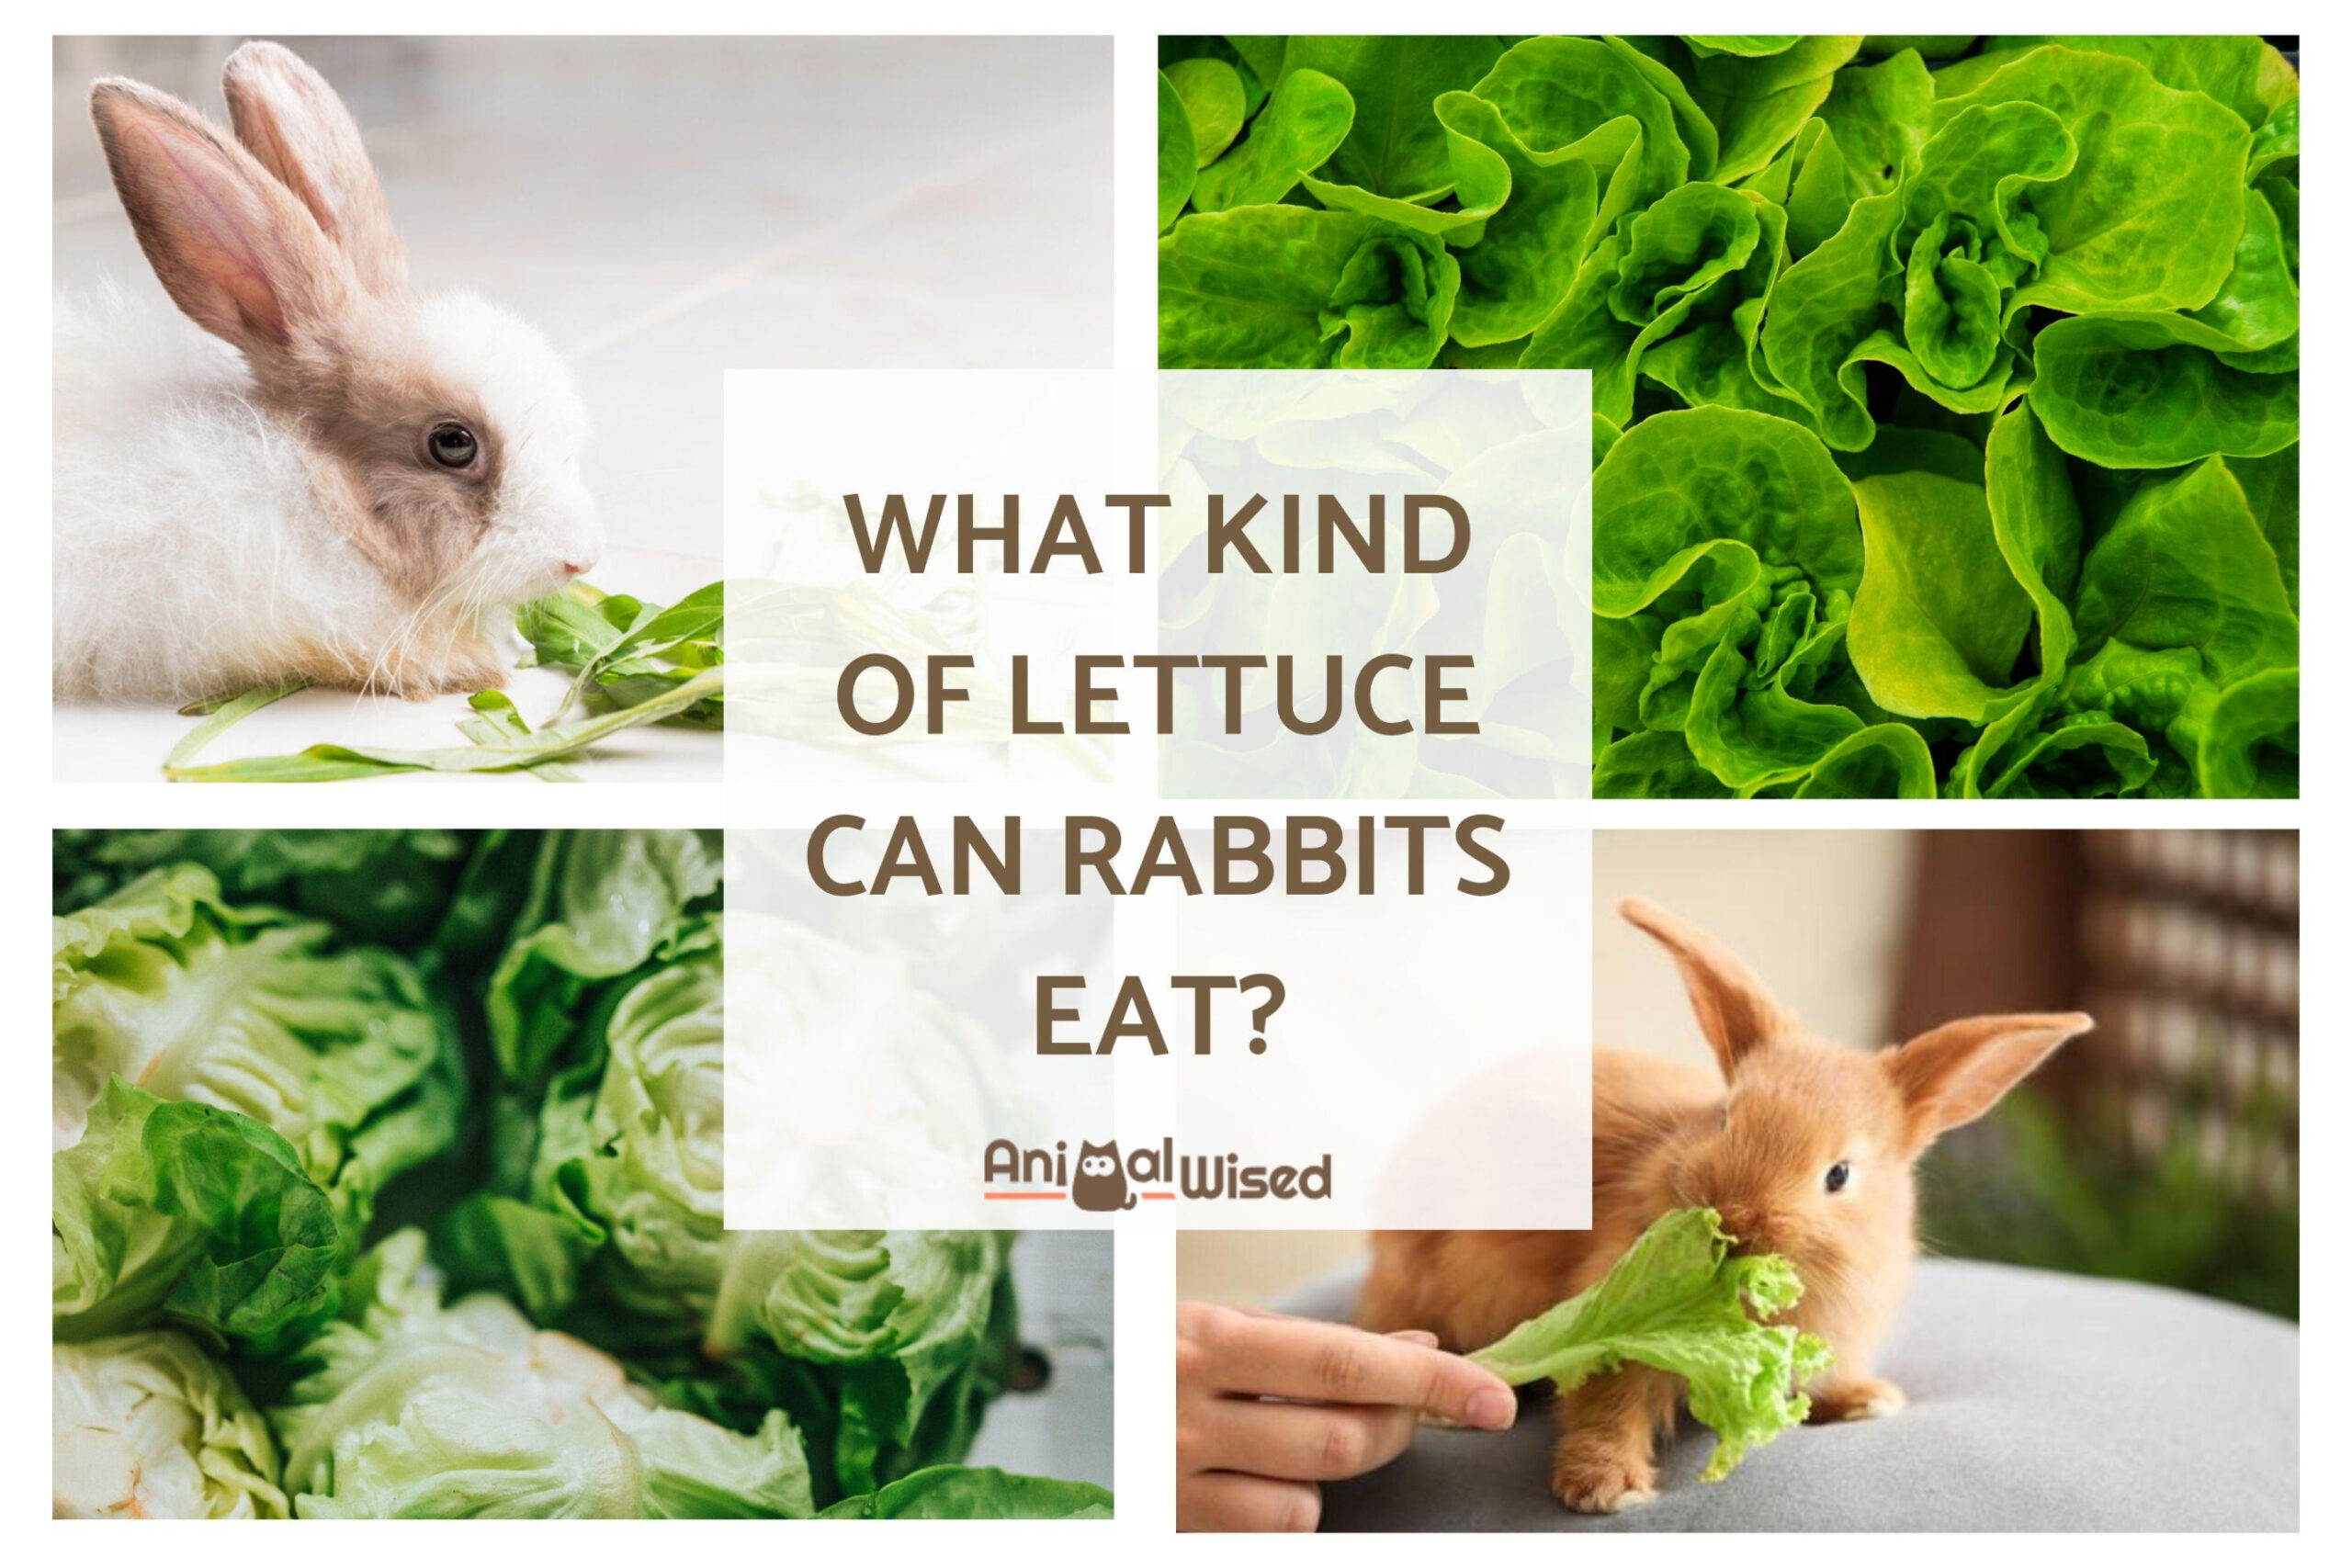 Can Rabbits Eat Lettuce? - What Kind of Lettuce Can Rabbits Eat?